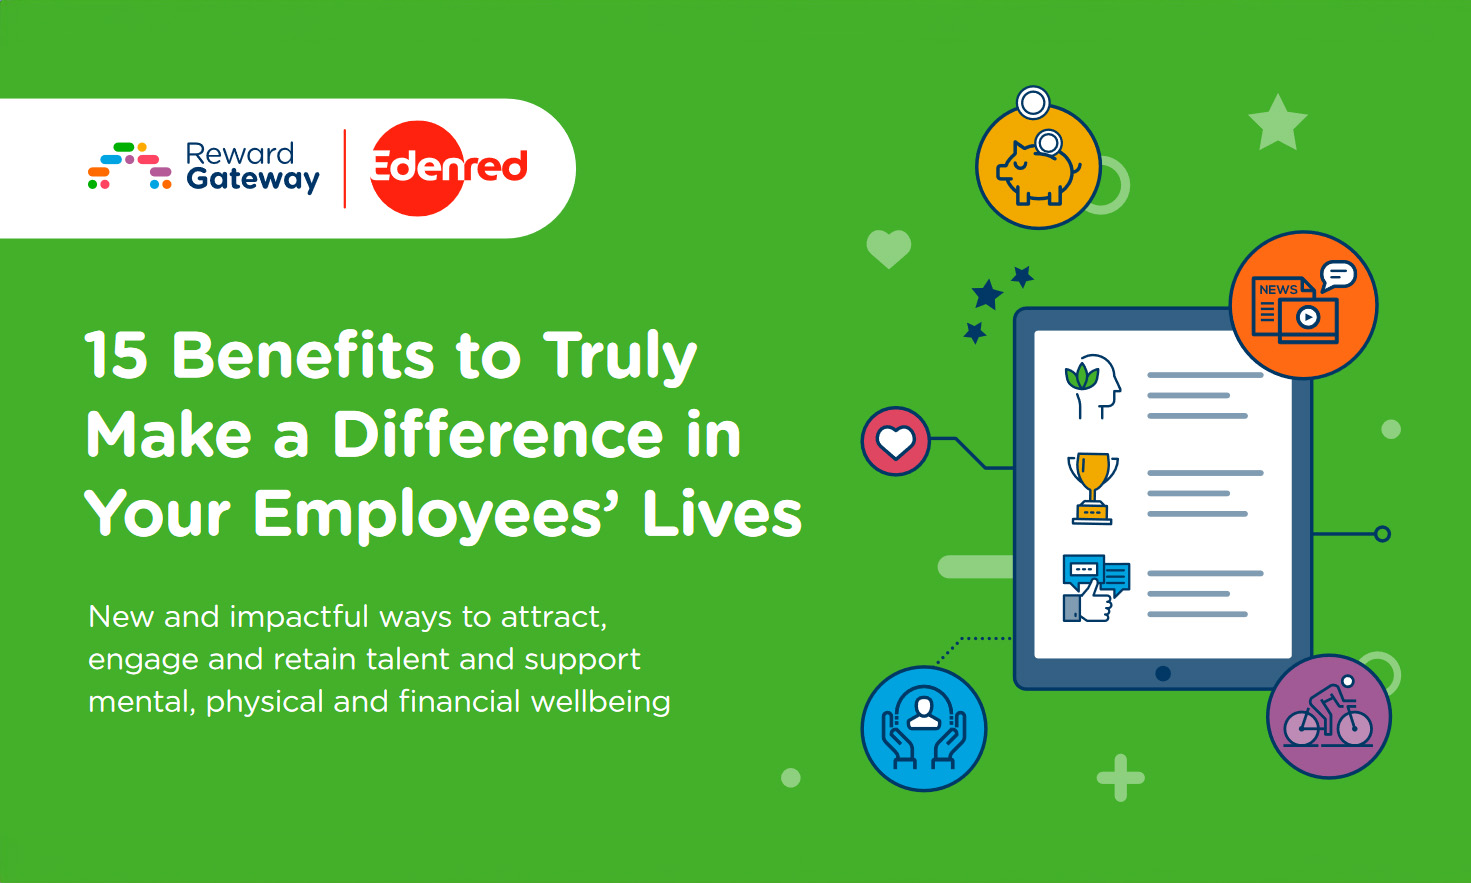 Free Whitepaper: 15 Benefits to Make a Difference in Your Employees' Lives